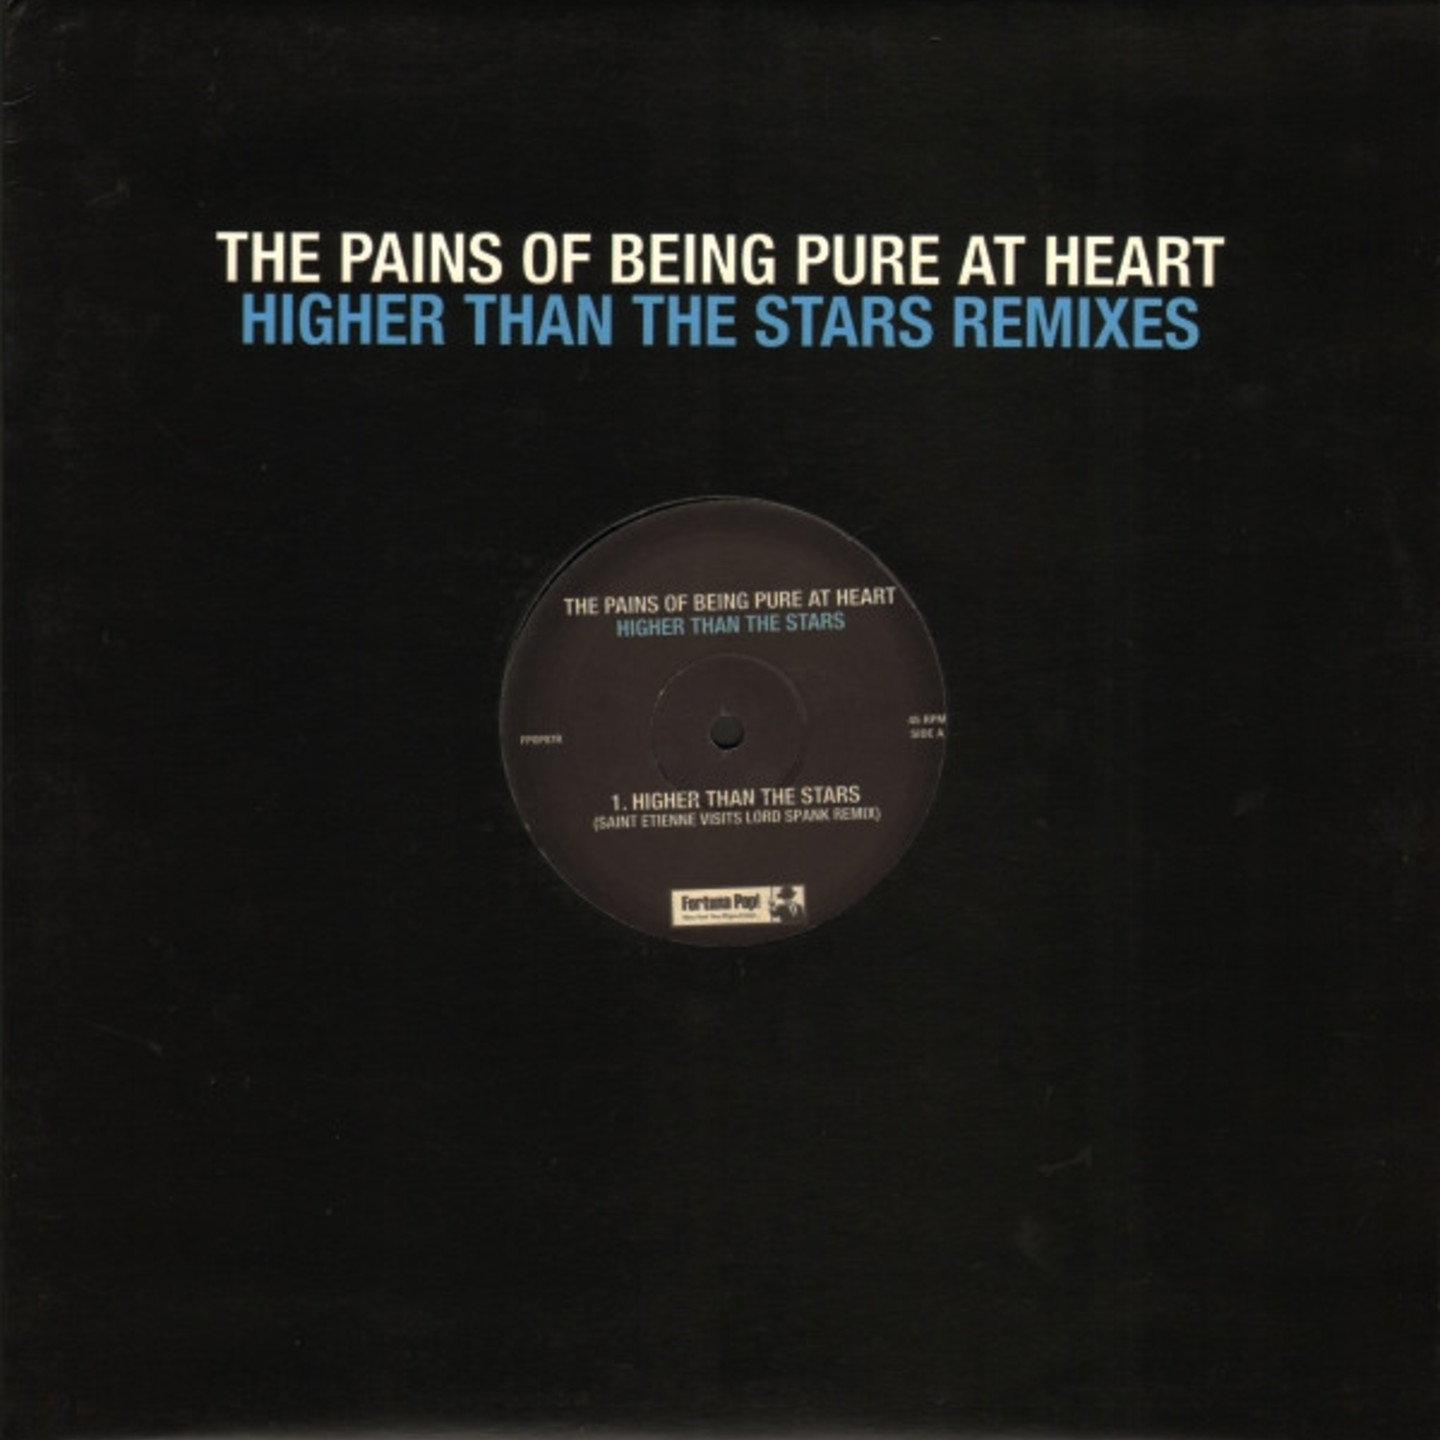 PAINS OF BEING PURE AT HEART, THE - Higher Than The Stars EP REMIX 12